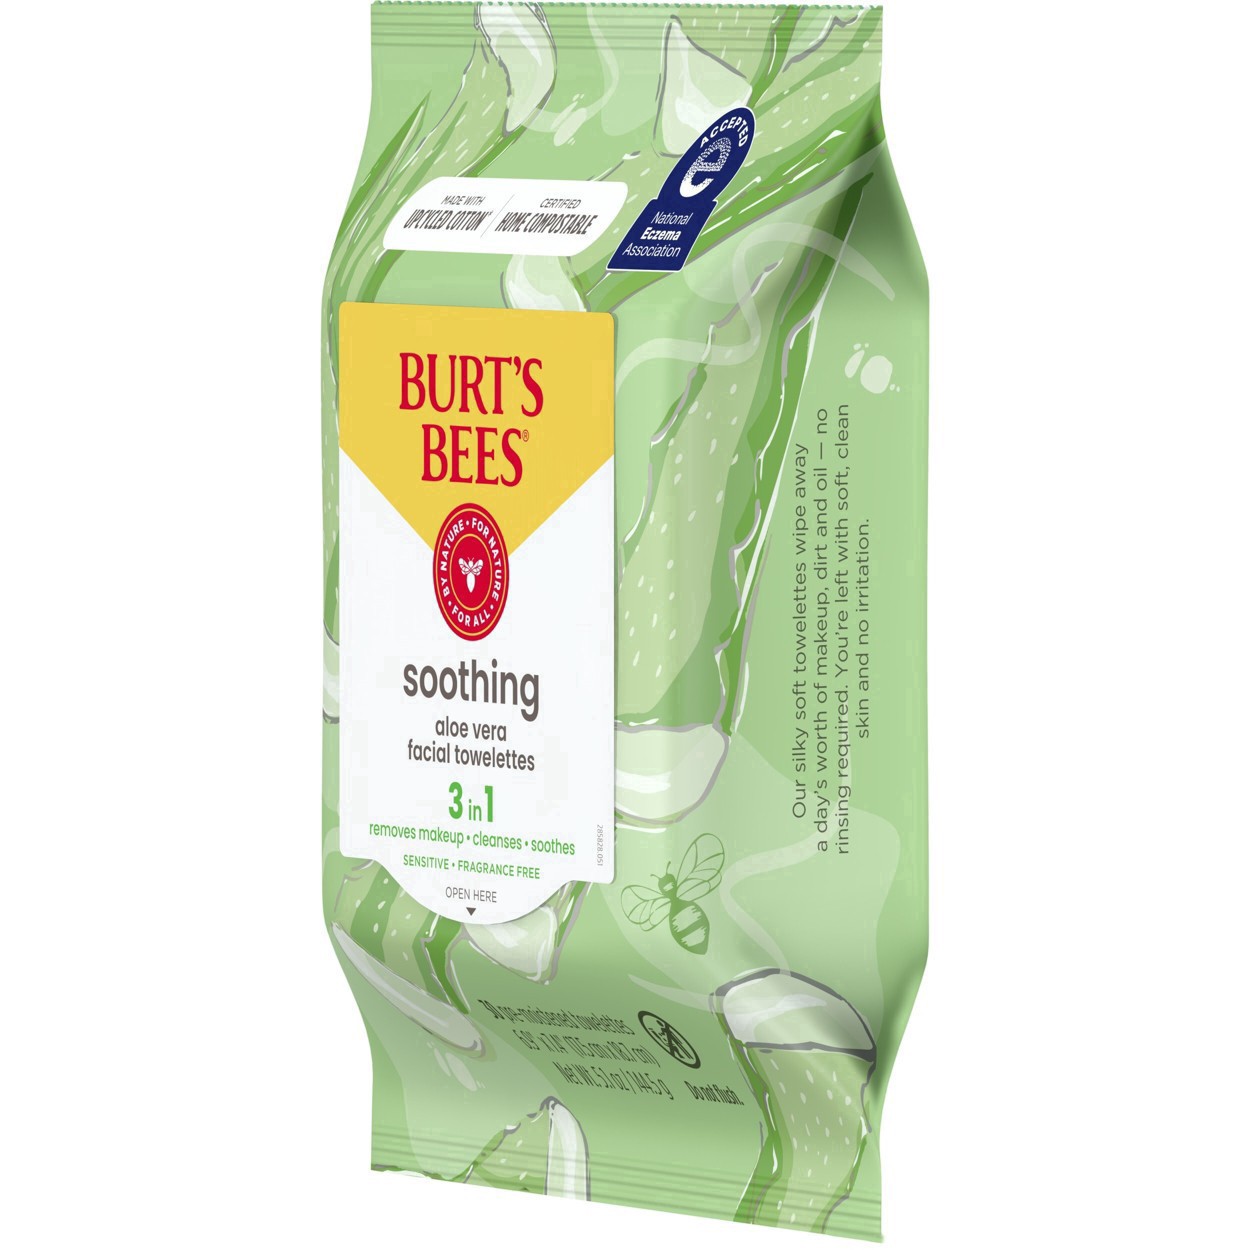 slide 26 of 137, Burt's Bees Soothing Facial Cleanser and Makeup Remover Towelettes with Aloe Vera for Sensitive Skin, Made with Upcycled Cotton, 30 Count, 30 ct